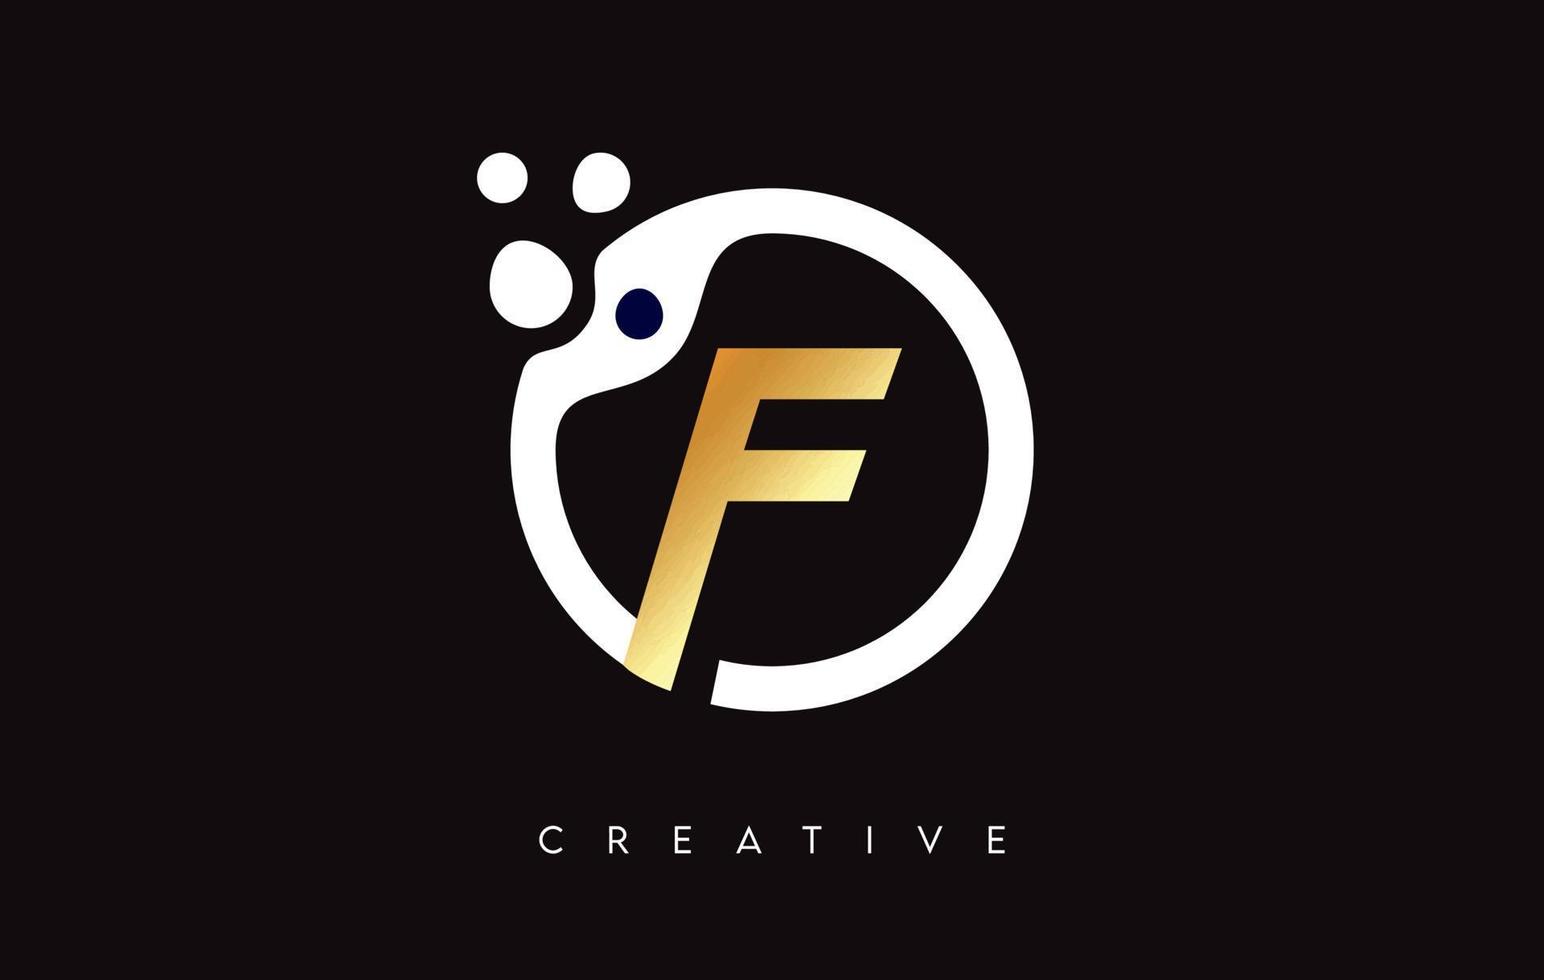 Golden Letter F Logo with Dots and Bubbles inside a Circular Shape in Gold Colors Vector